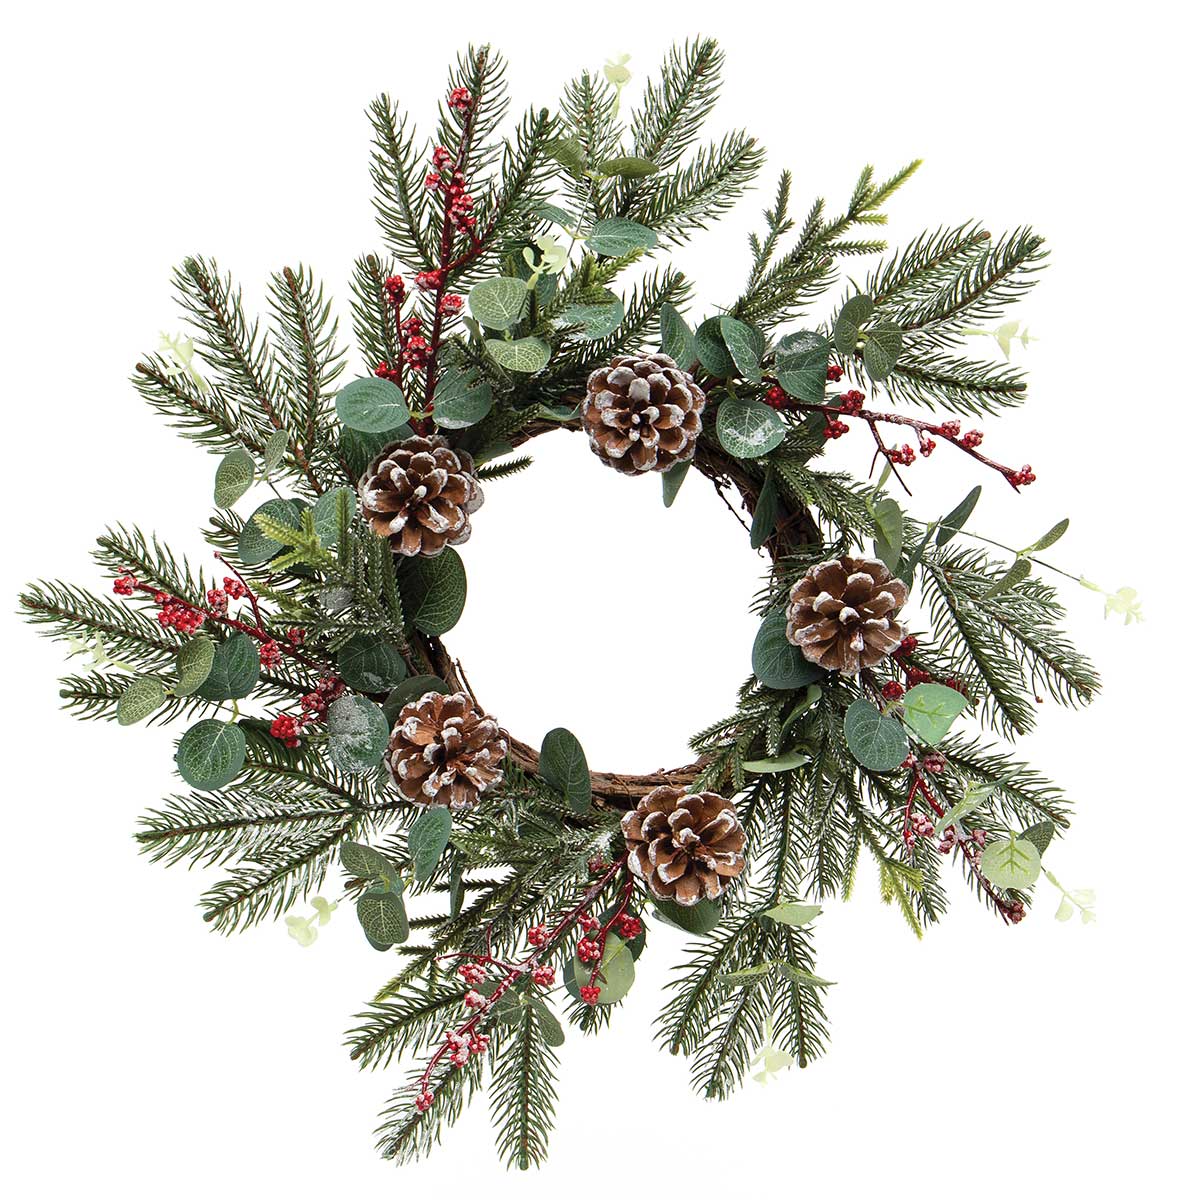 !HOLIDAY BERRY WREATH WITH RED BERRIES, PINE, EUCALYPTUS